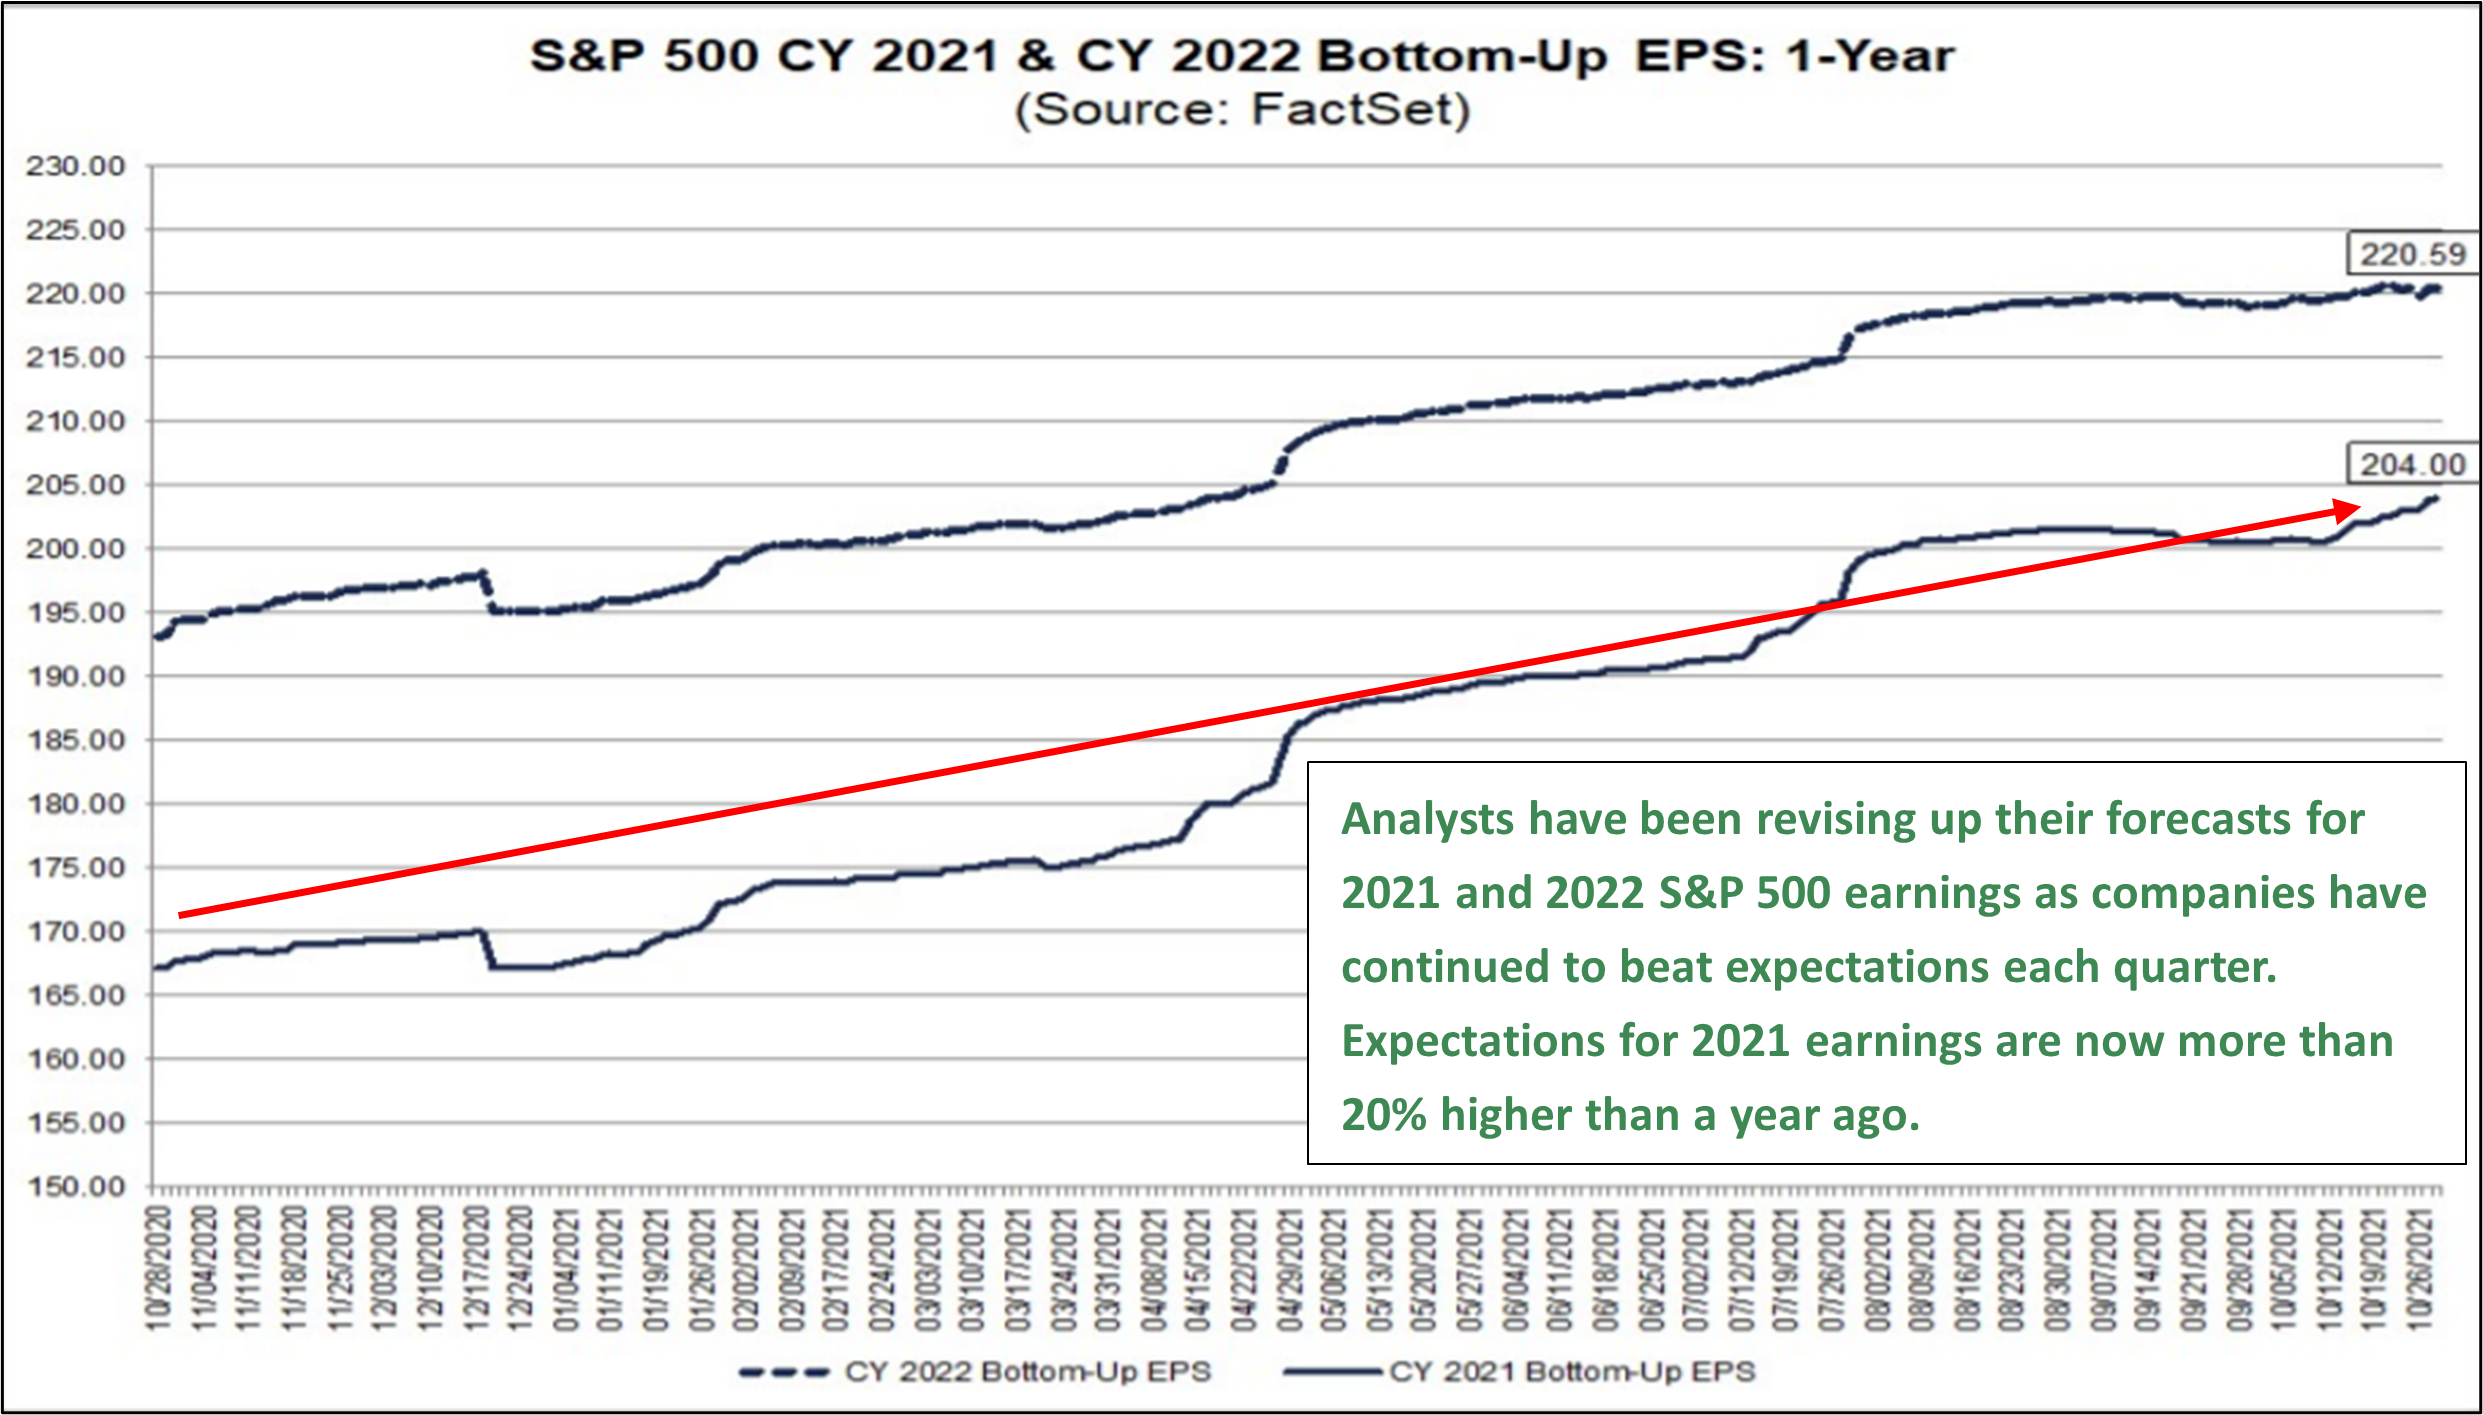 Line graph depicting S&P 500 CY 2021 & CY 2022 Bottom-Up-EPS: 1-Year from October 28, 2020 to October 26, 2021 with text that reads: Analysts have been revising up their forecasts for 2021 and 2022 S&P 500 earnings as companies have continued to beat expectations each quarter. Expectations for 2021 earnings are now more than 20% higher than a year ago.